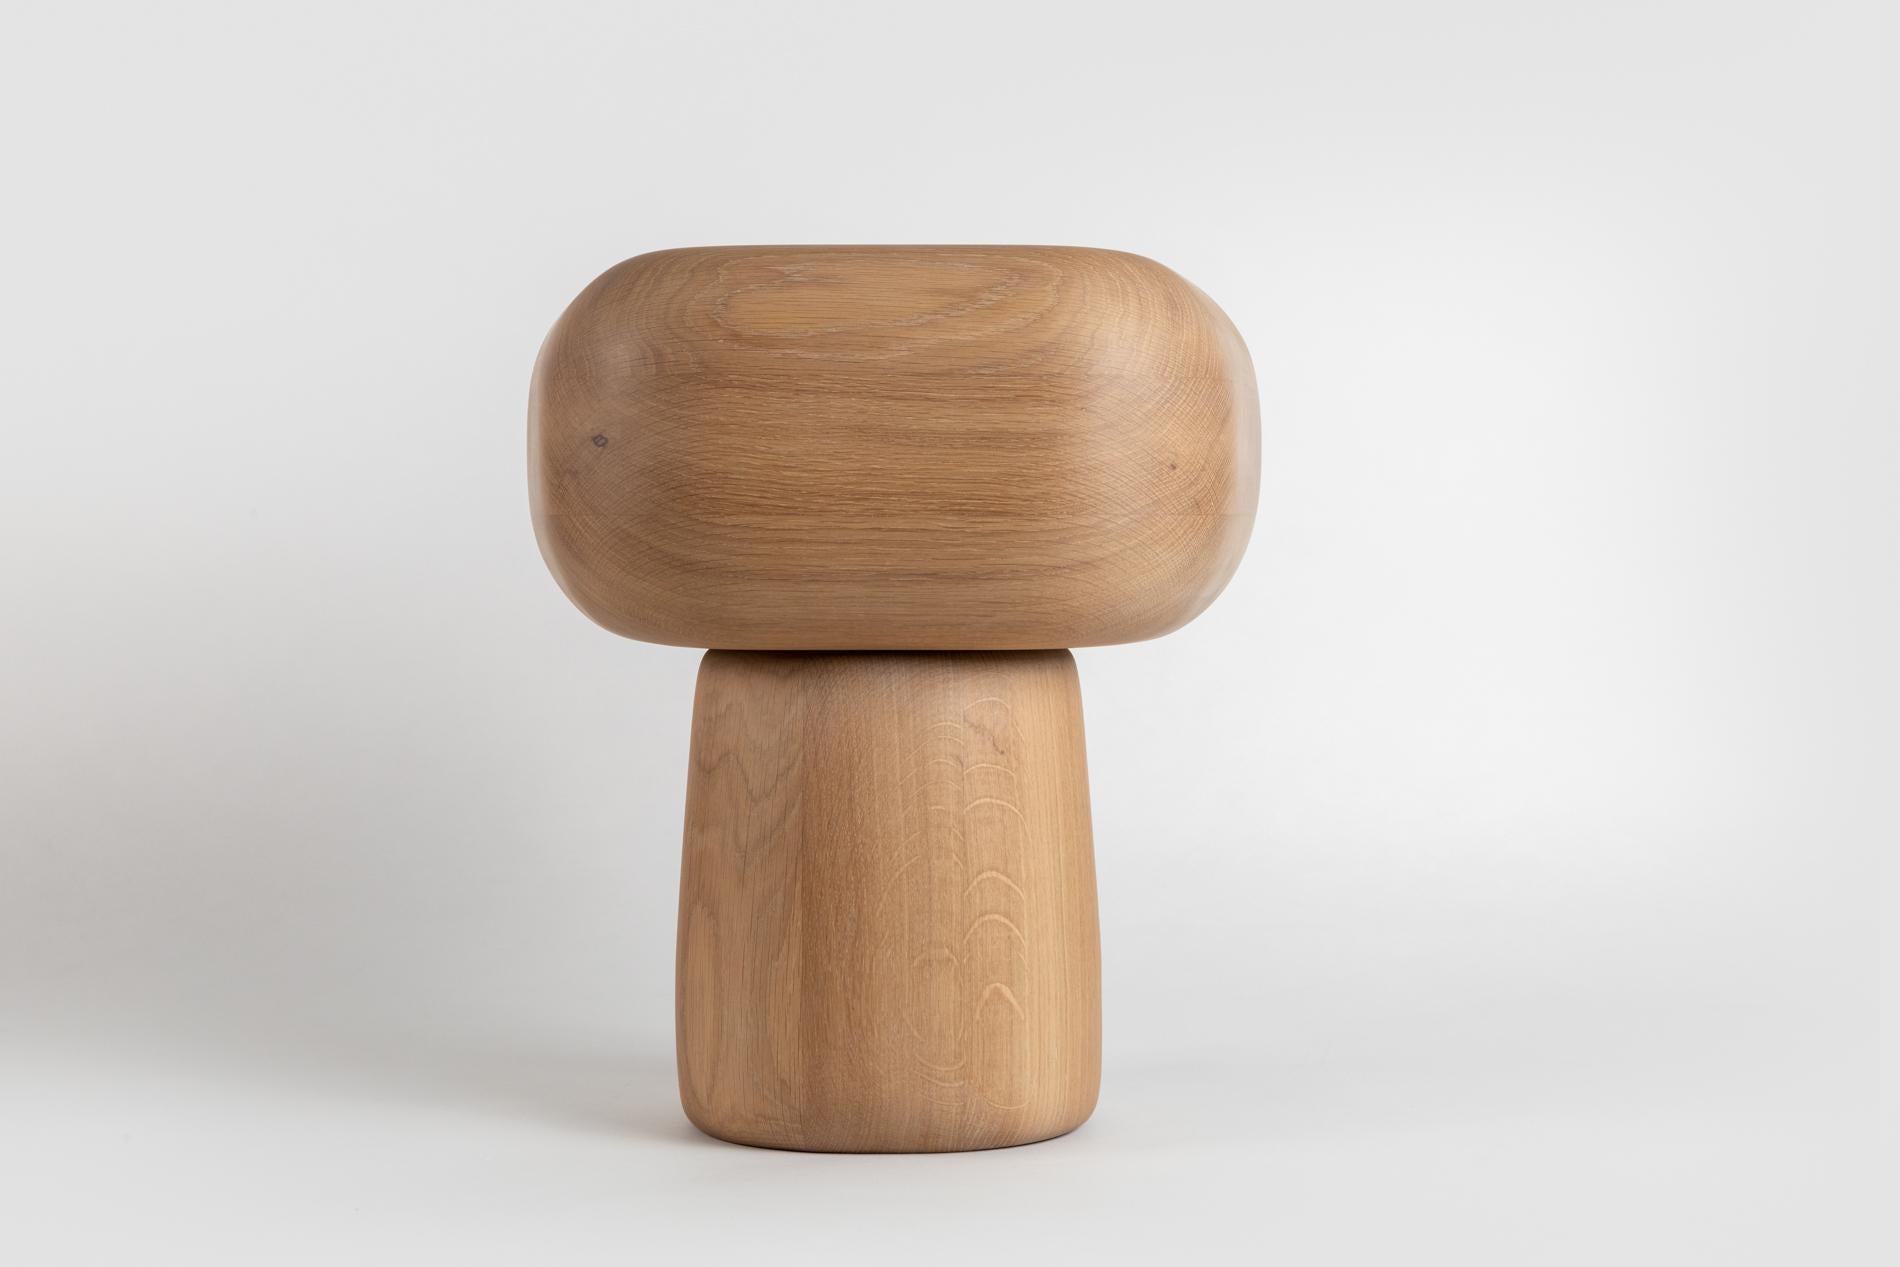 Hughes Stool by Moure Studio
Limited Edition of 23.
Dimensions: D40x W45 x H27.8  cm
Materials: Oiled solid oak

The Hughes stool is made of solid oak wood with an oil finish.
Limited to 23 units.

Moure / Studio is a Parisian interdisciplinary